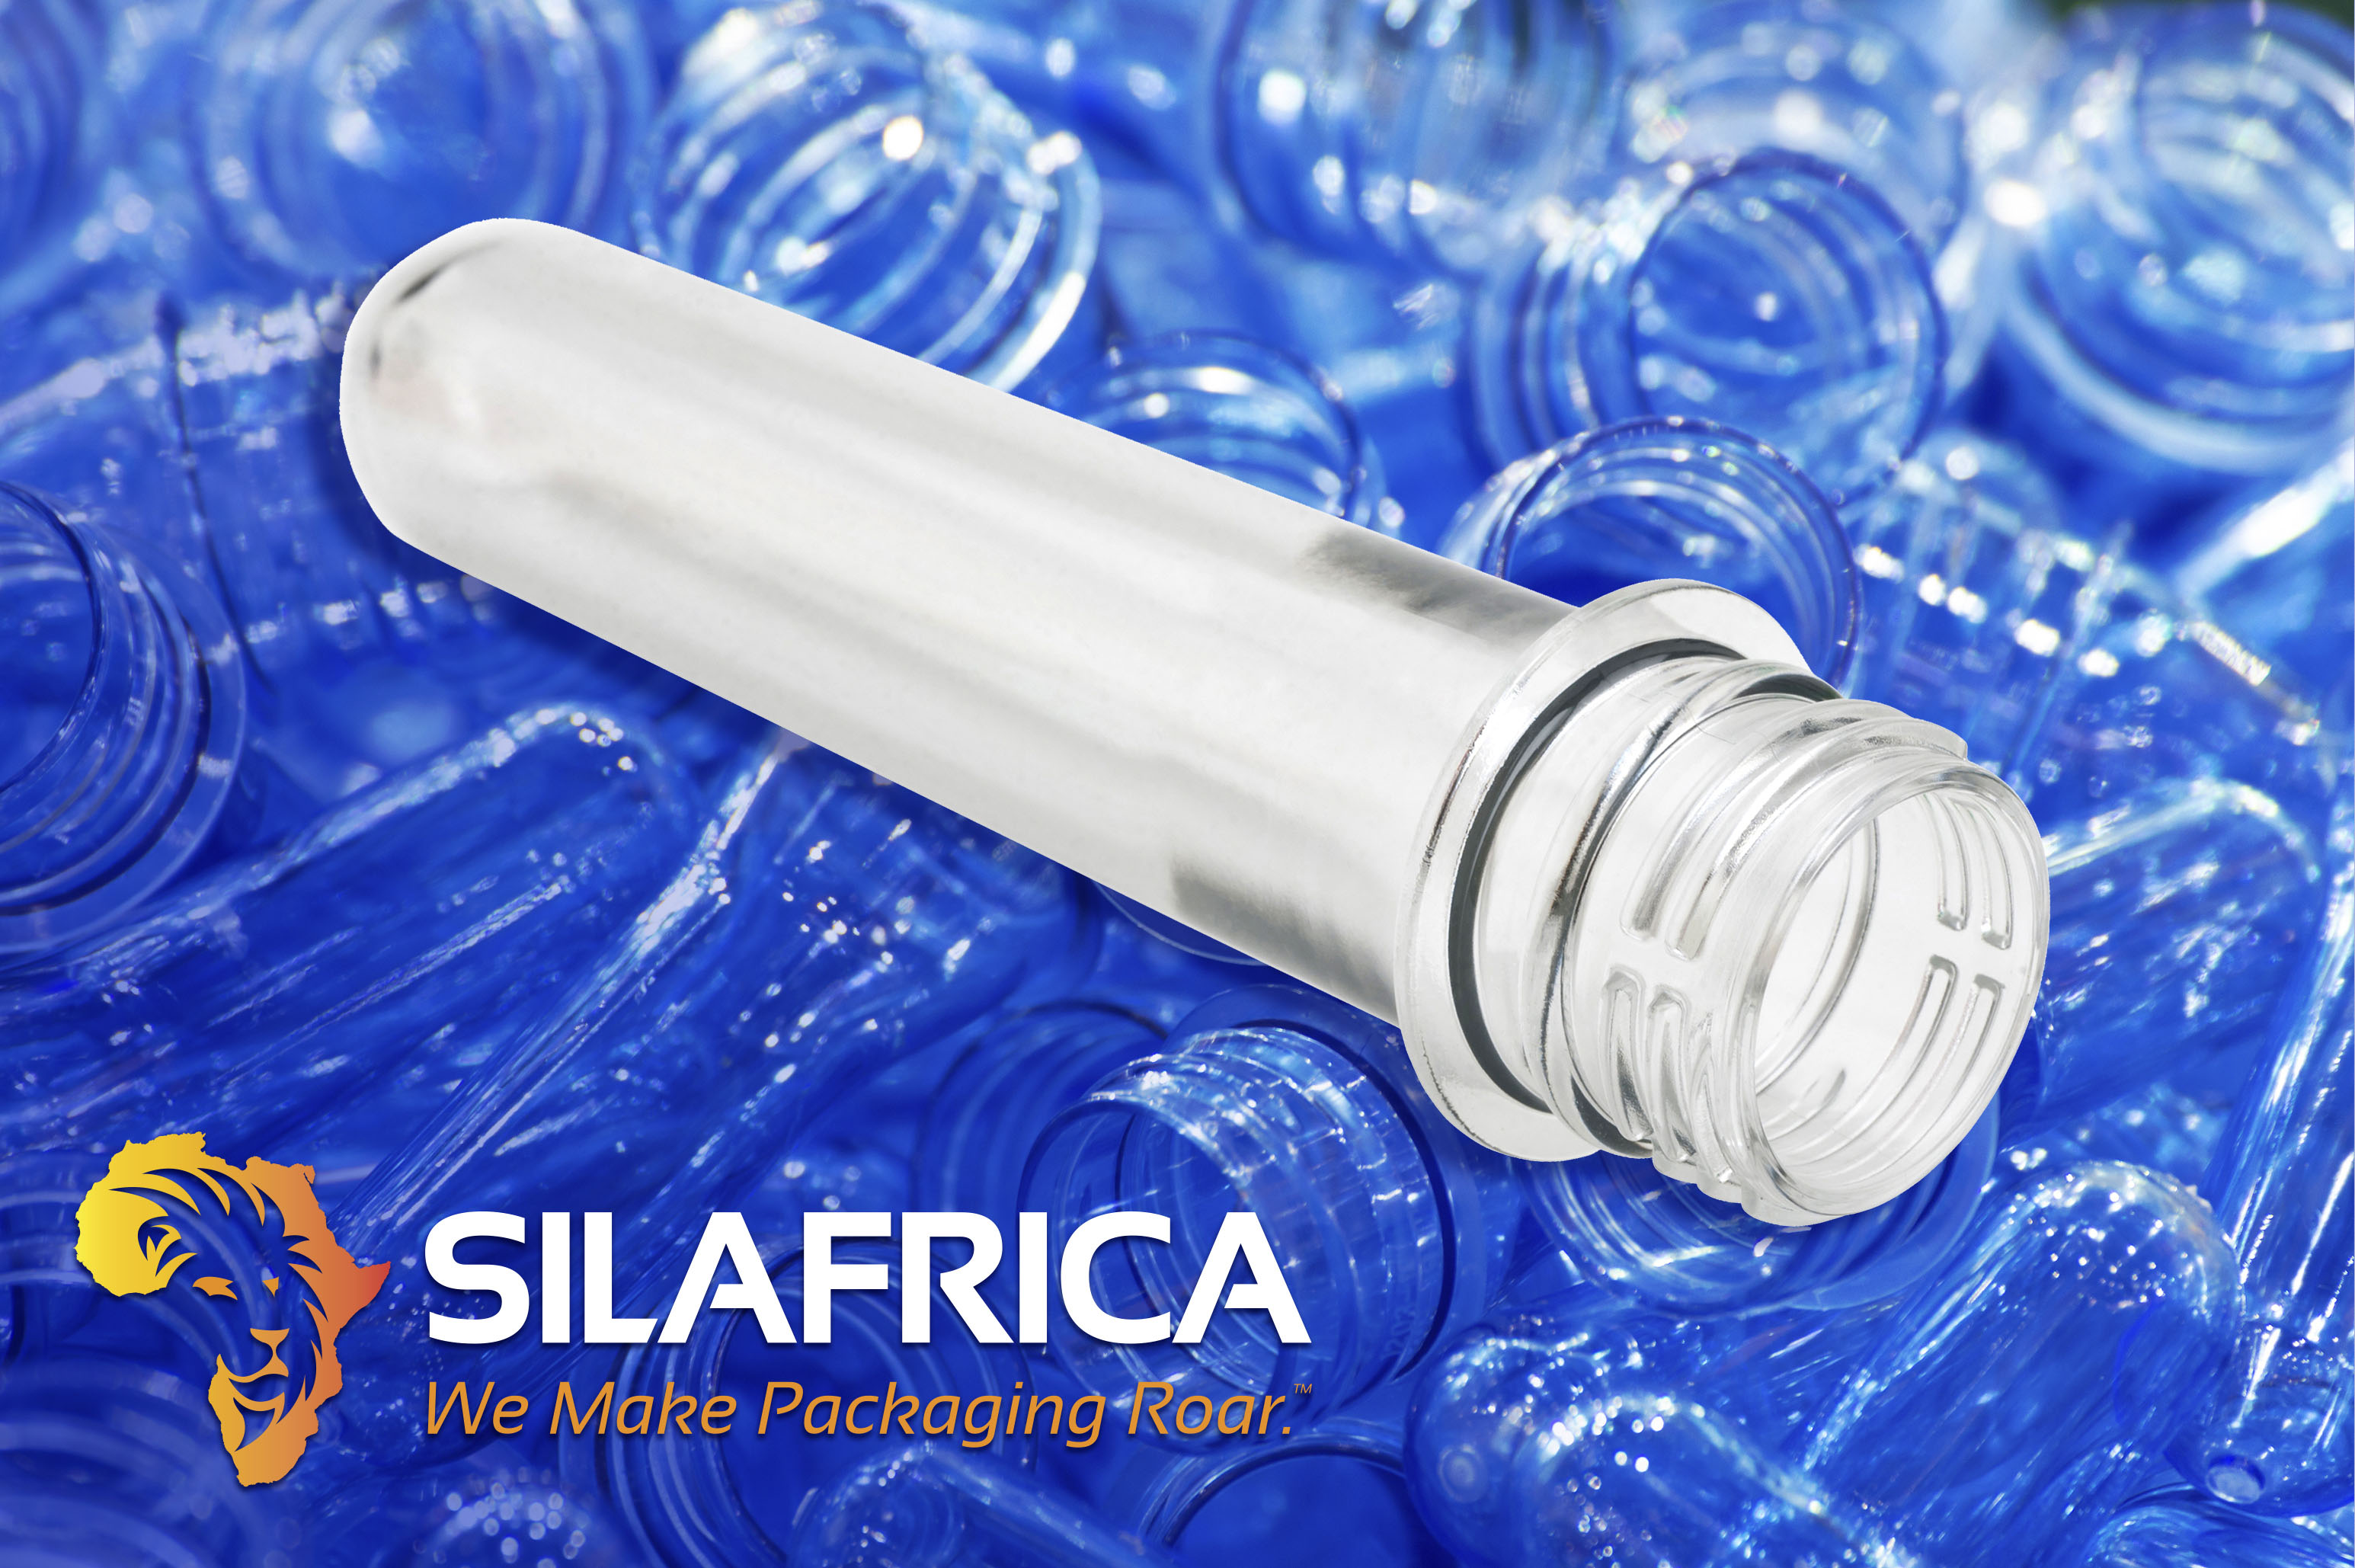 Silafrica Tanzania, with four preform machines in their plant, makes high-quality products with the majority of them running at 95% OEE (Overall Equipment Efficiency).